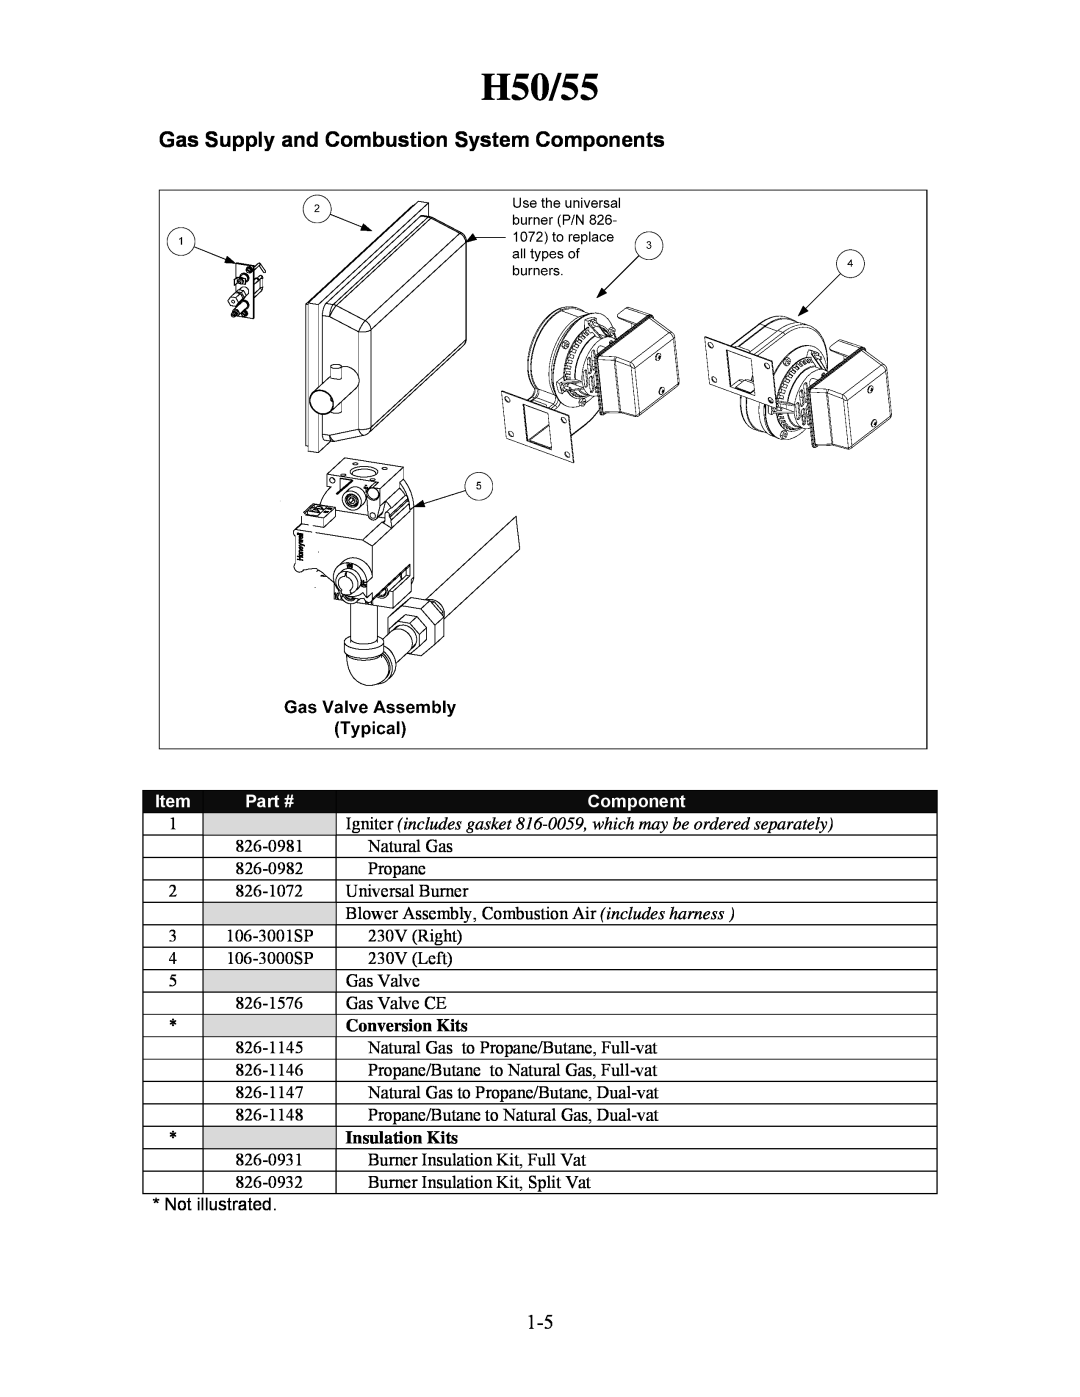 Frymaster manual H50/55, Gas Supply and Combustion System Components, Conversion Kits, Insulation Kits 